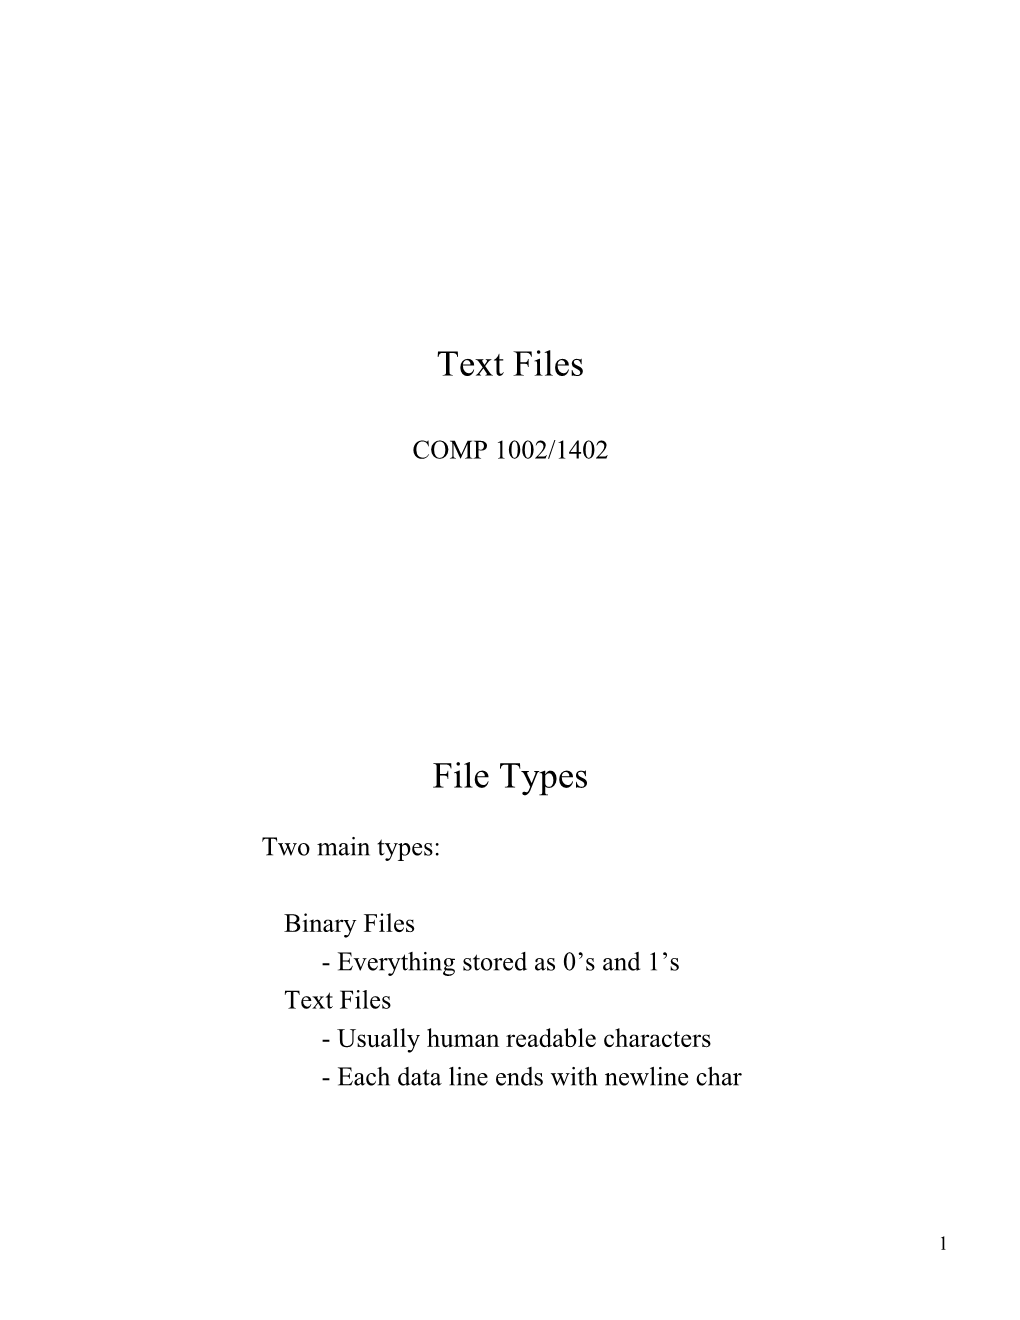 Text Files File Types